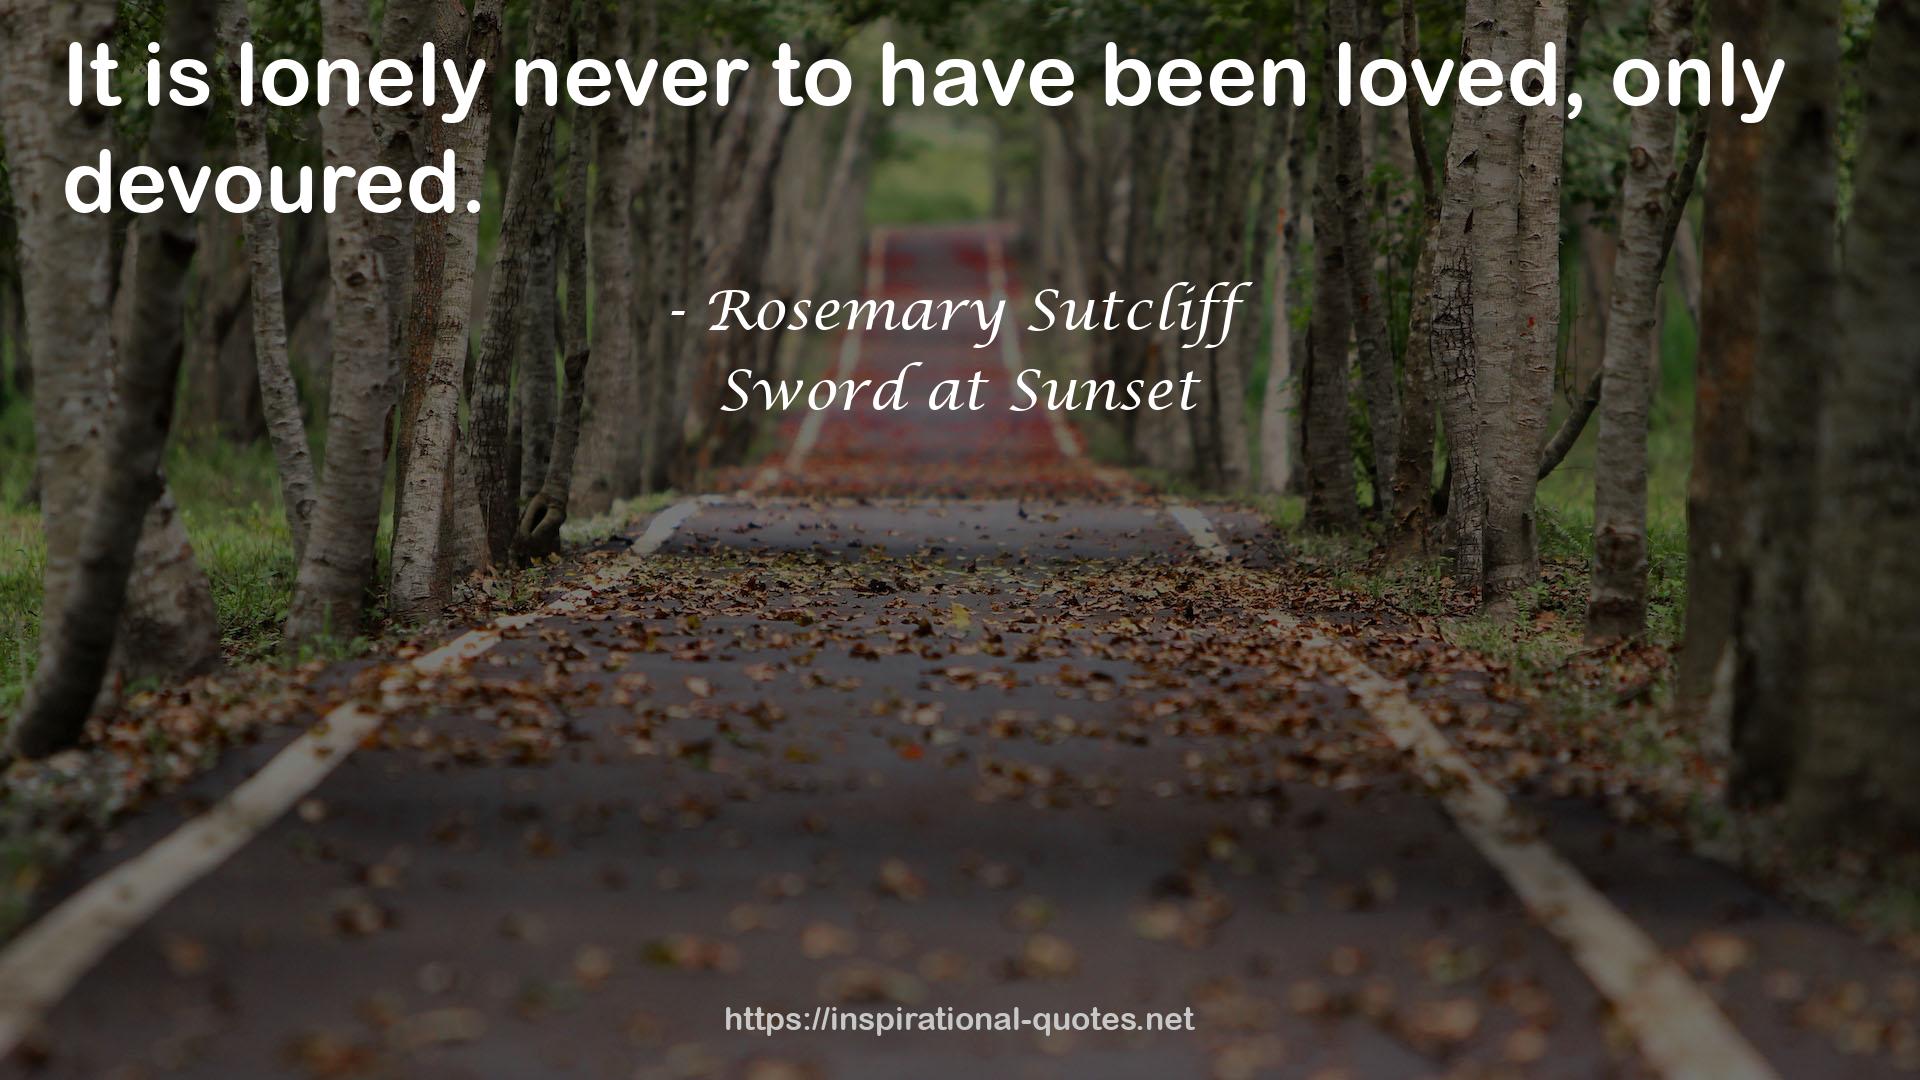 Sword at Sunset QUOTES